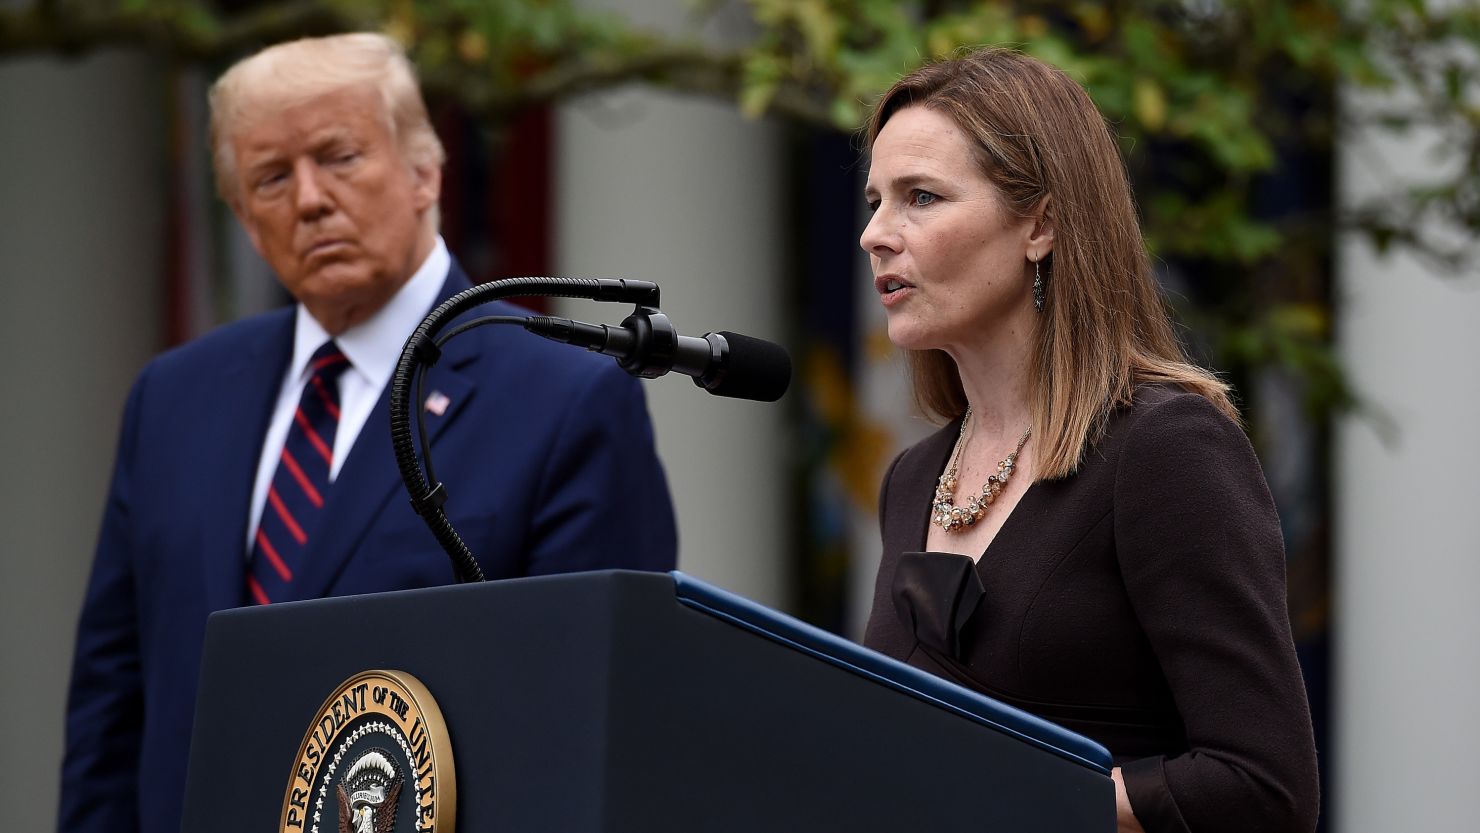 Roe v. Wade: Trump says he did not discuss case with Amy Coney Barrett ...